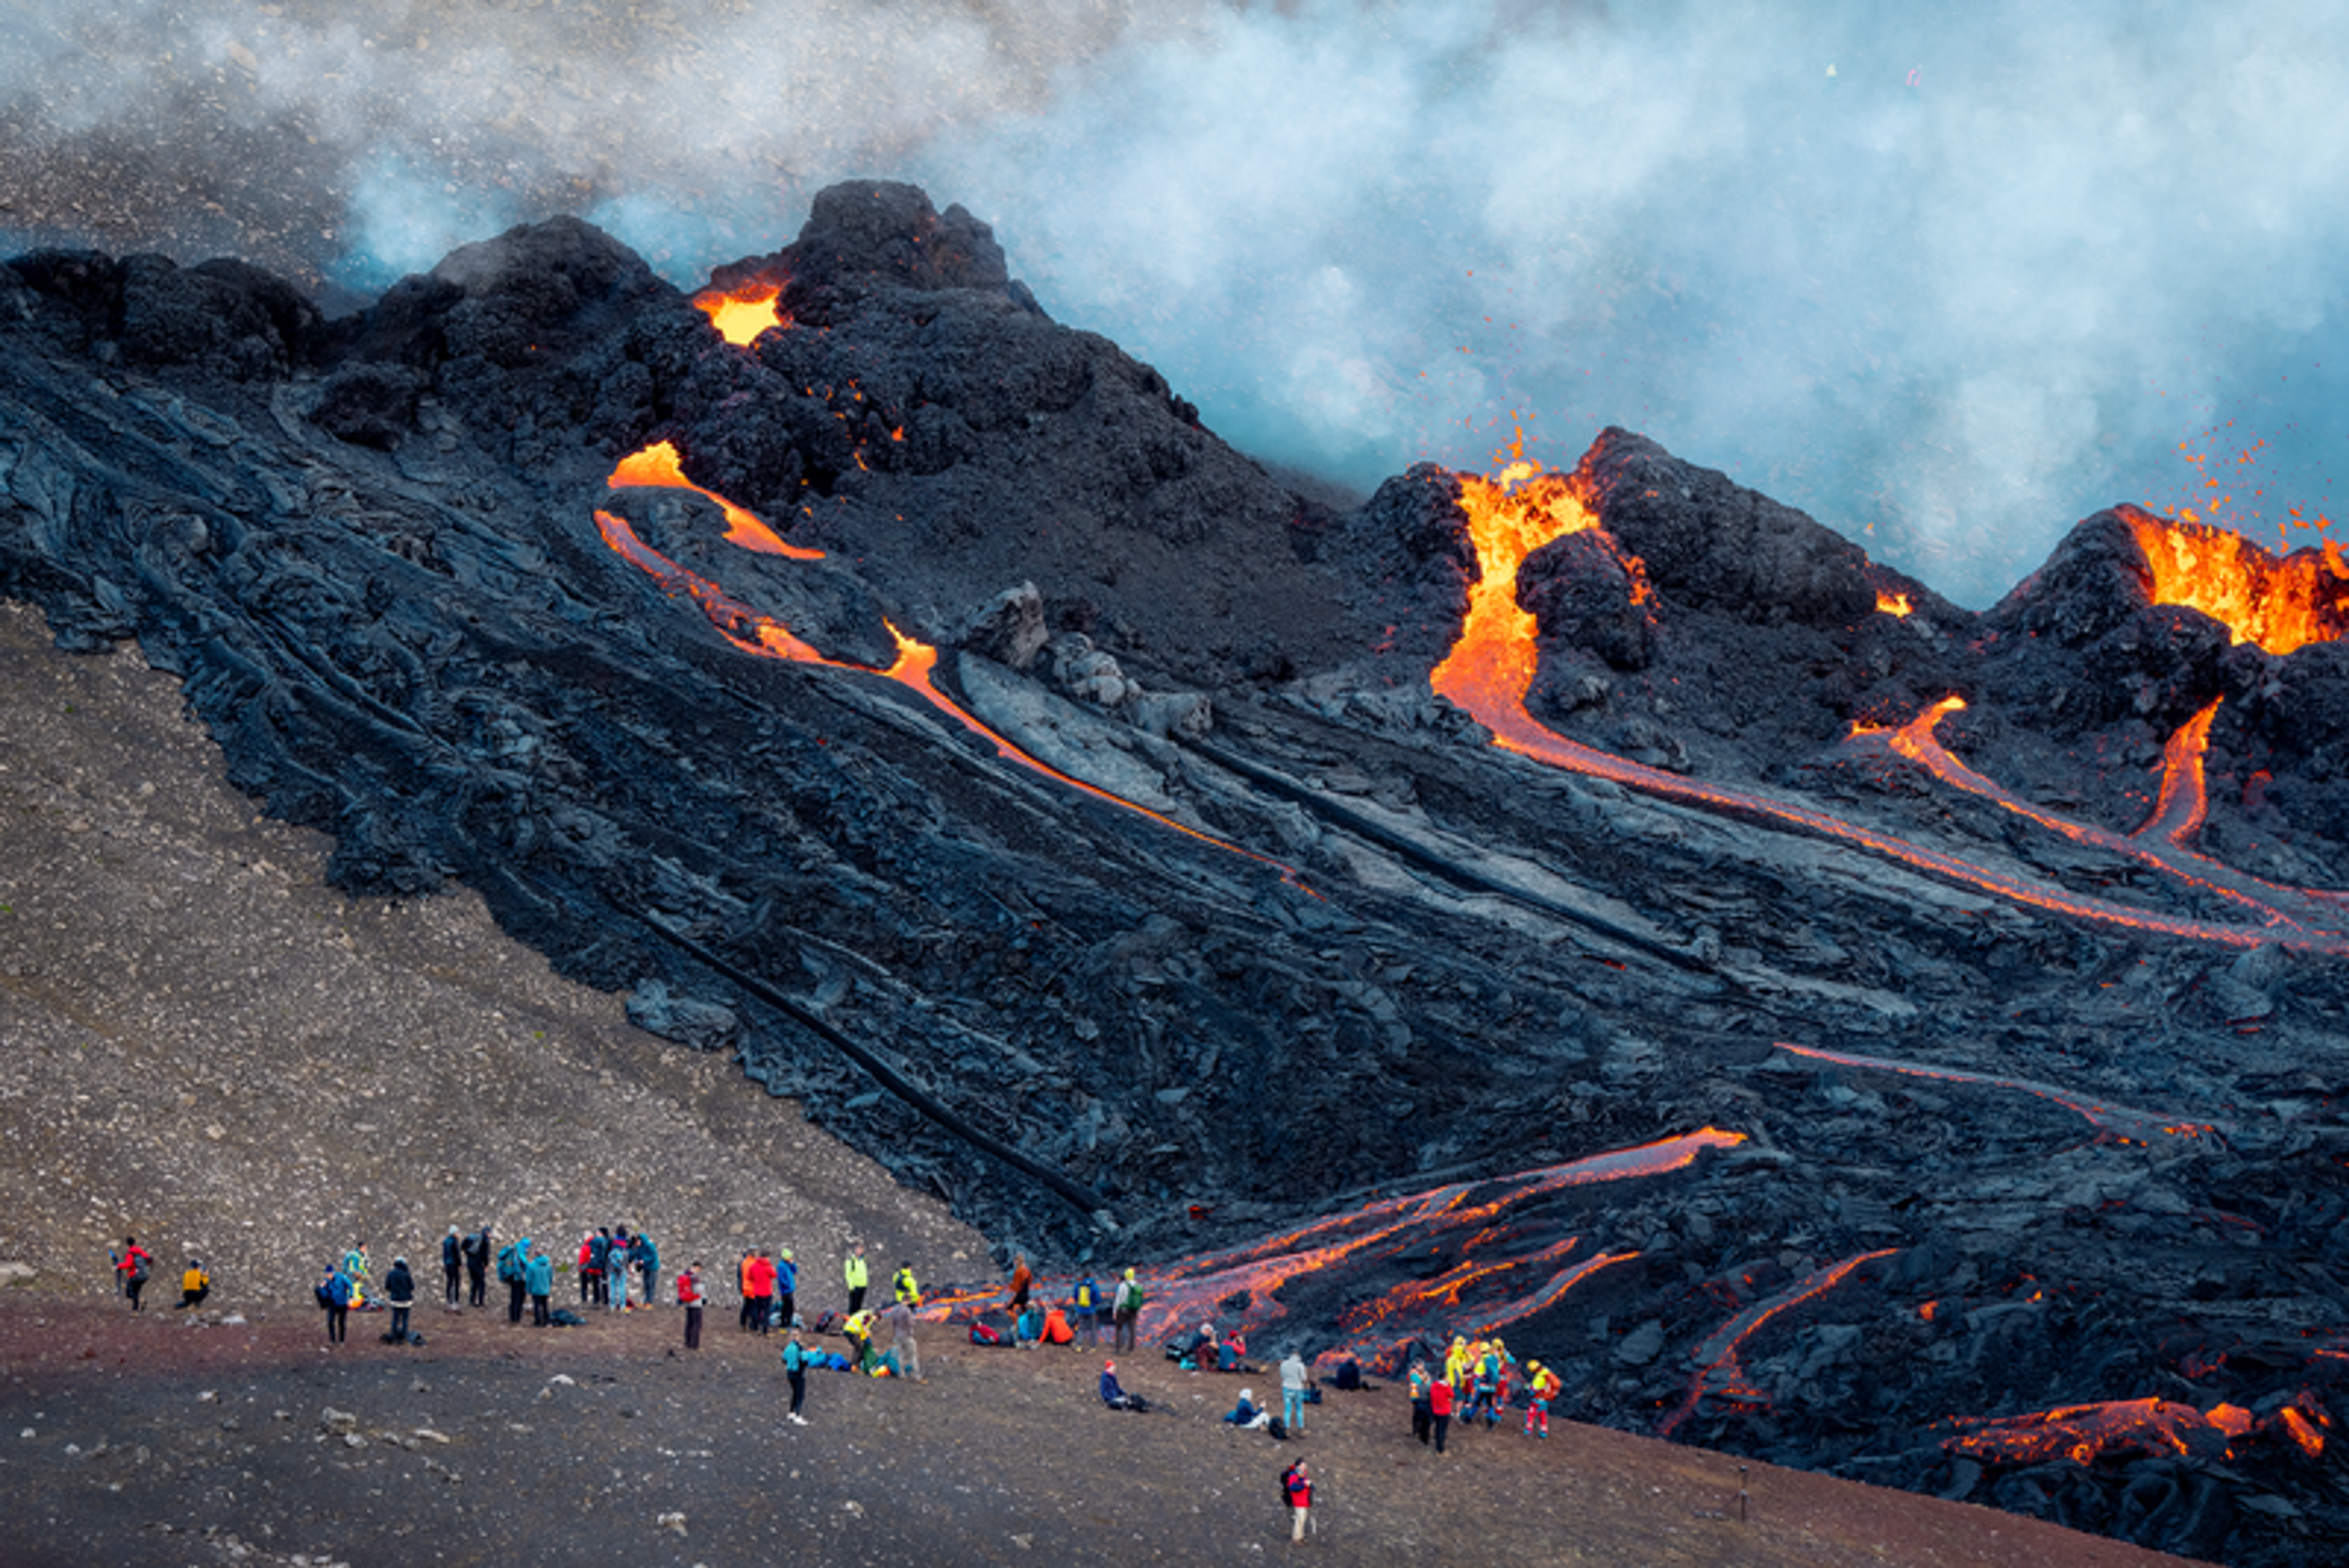 Spectators watching rivers of lava flowing from volcanic fissures on a dark, rugged terrain.